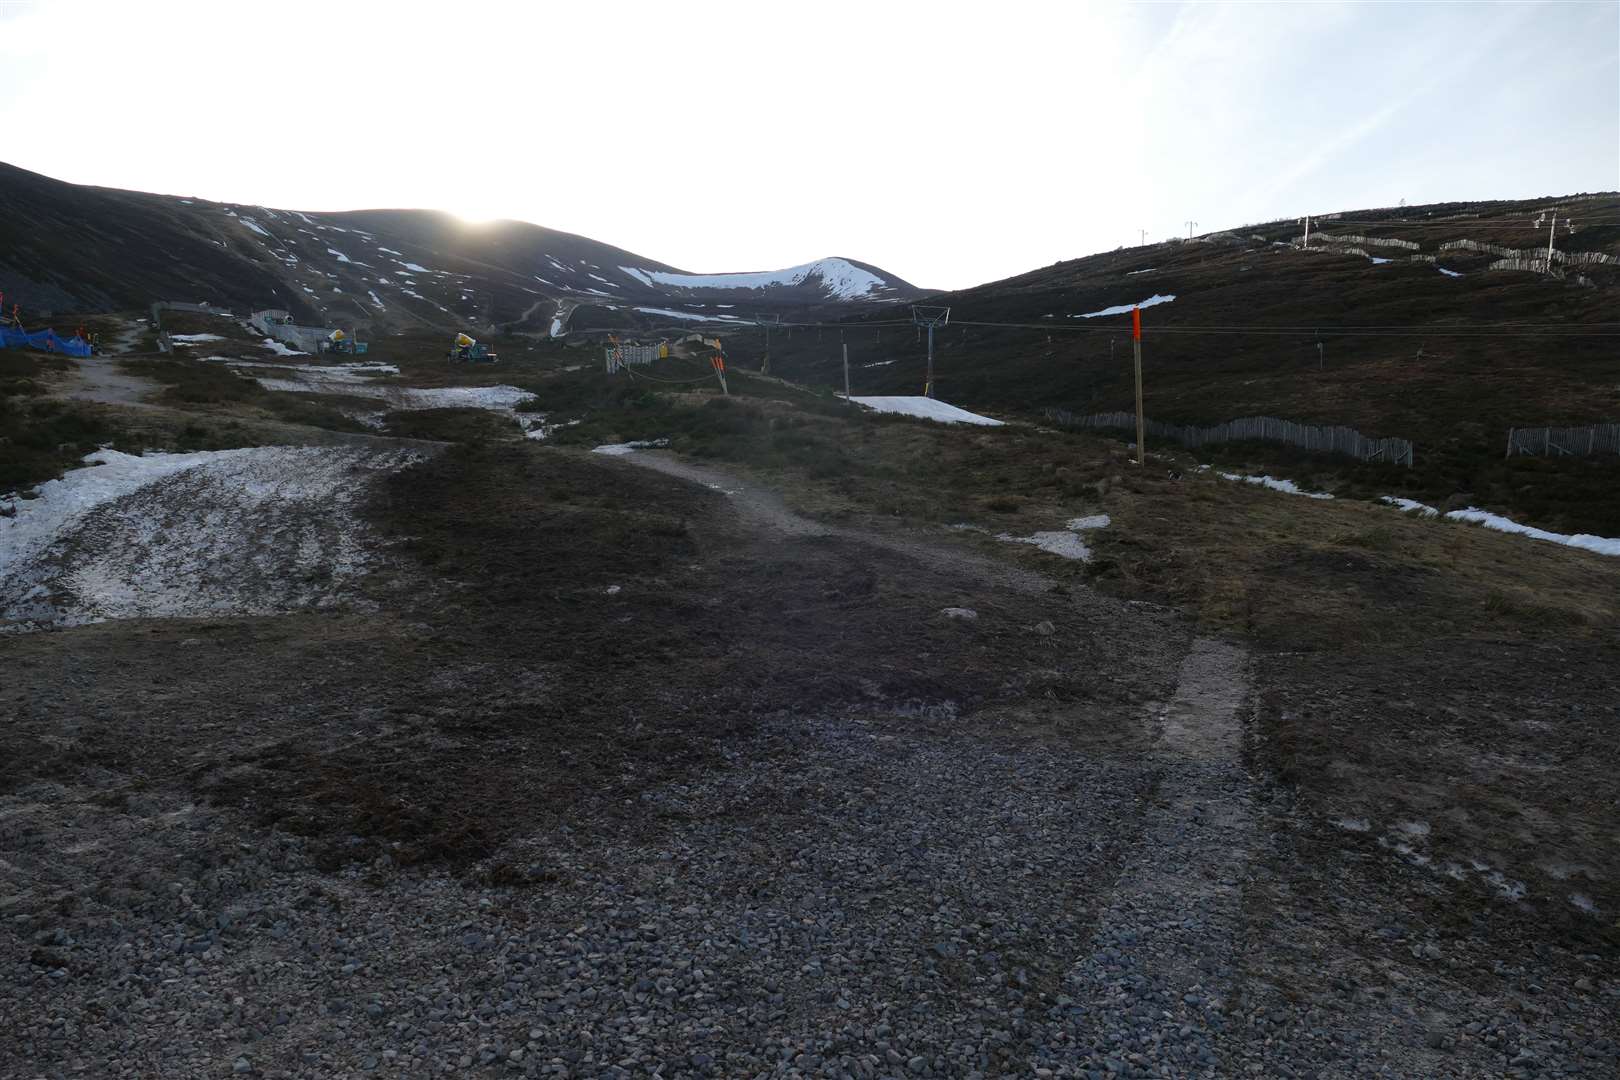 The rescue took place on the Cairngorms plateau in cold and wet conditions above the ski area (library image)